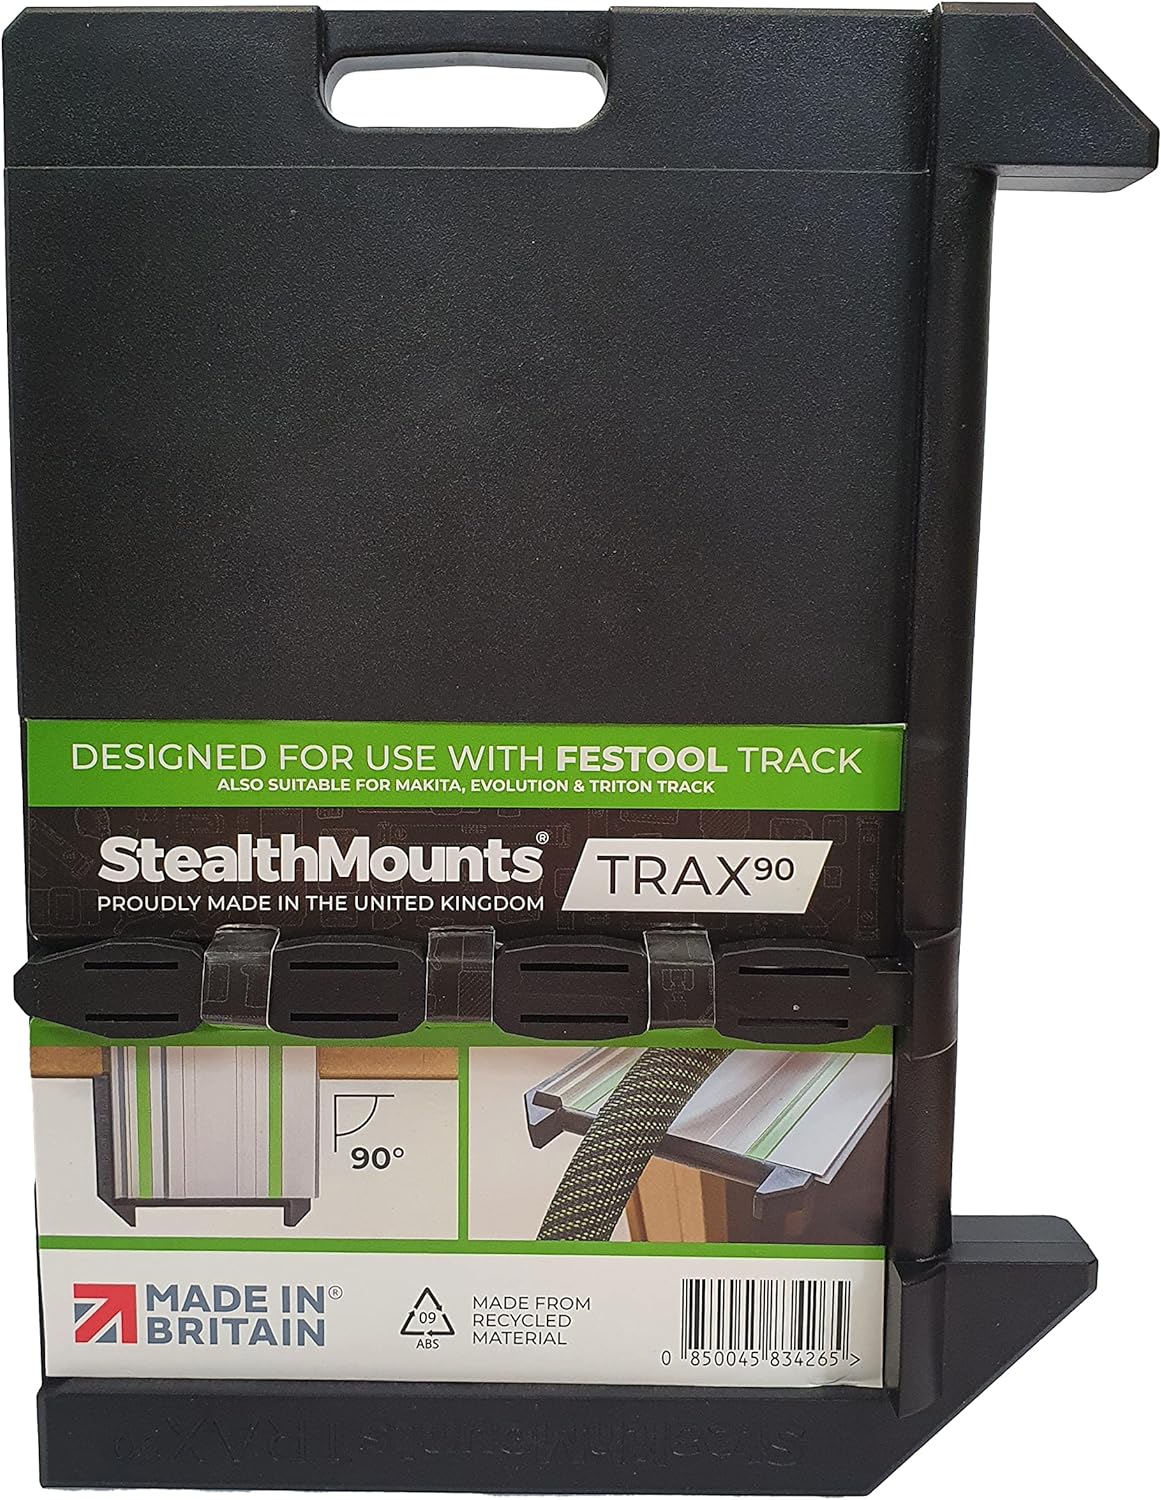 StealthMounts Trax90 Track Saw Square for Festool Track Saws | 90&#194;&#176; Right Angle Plunge Saw Guide Rail Angle Stop